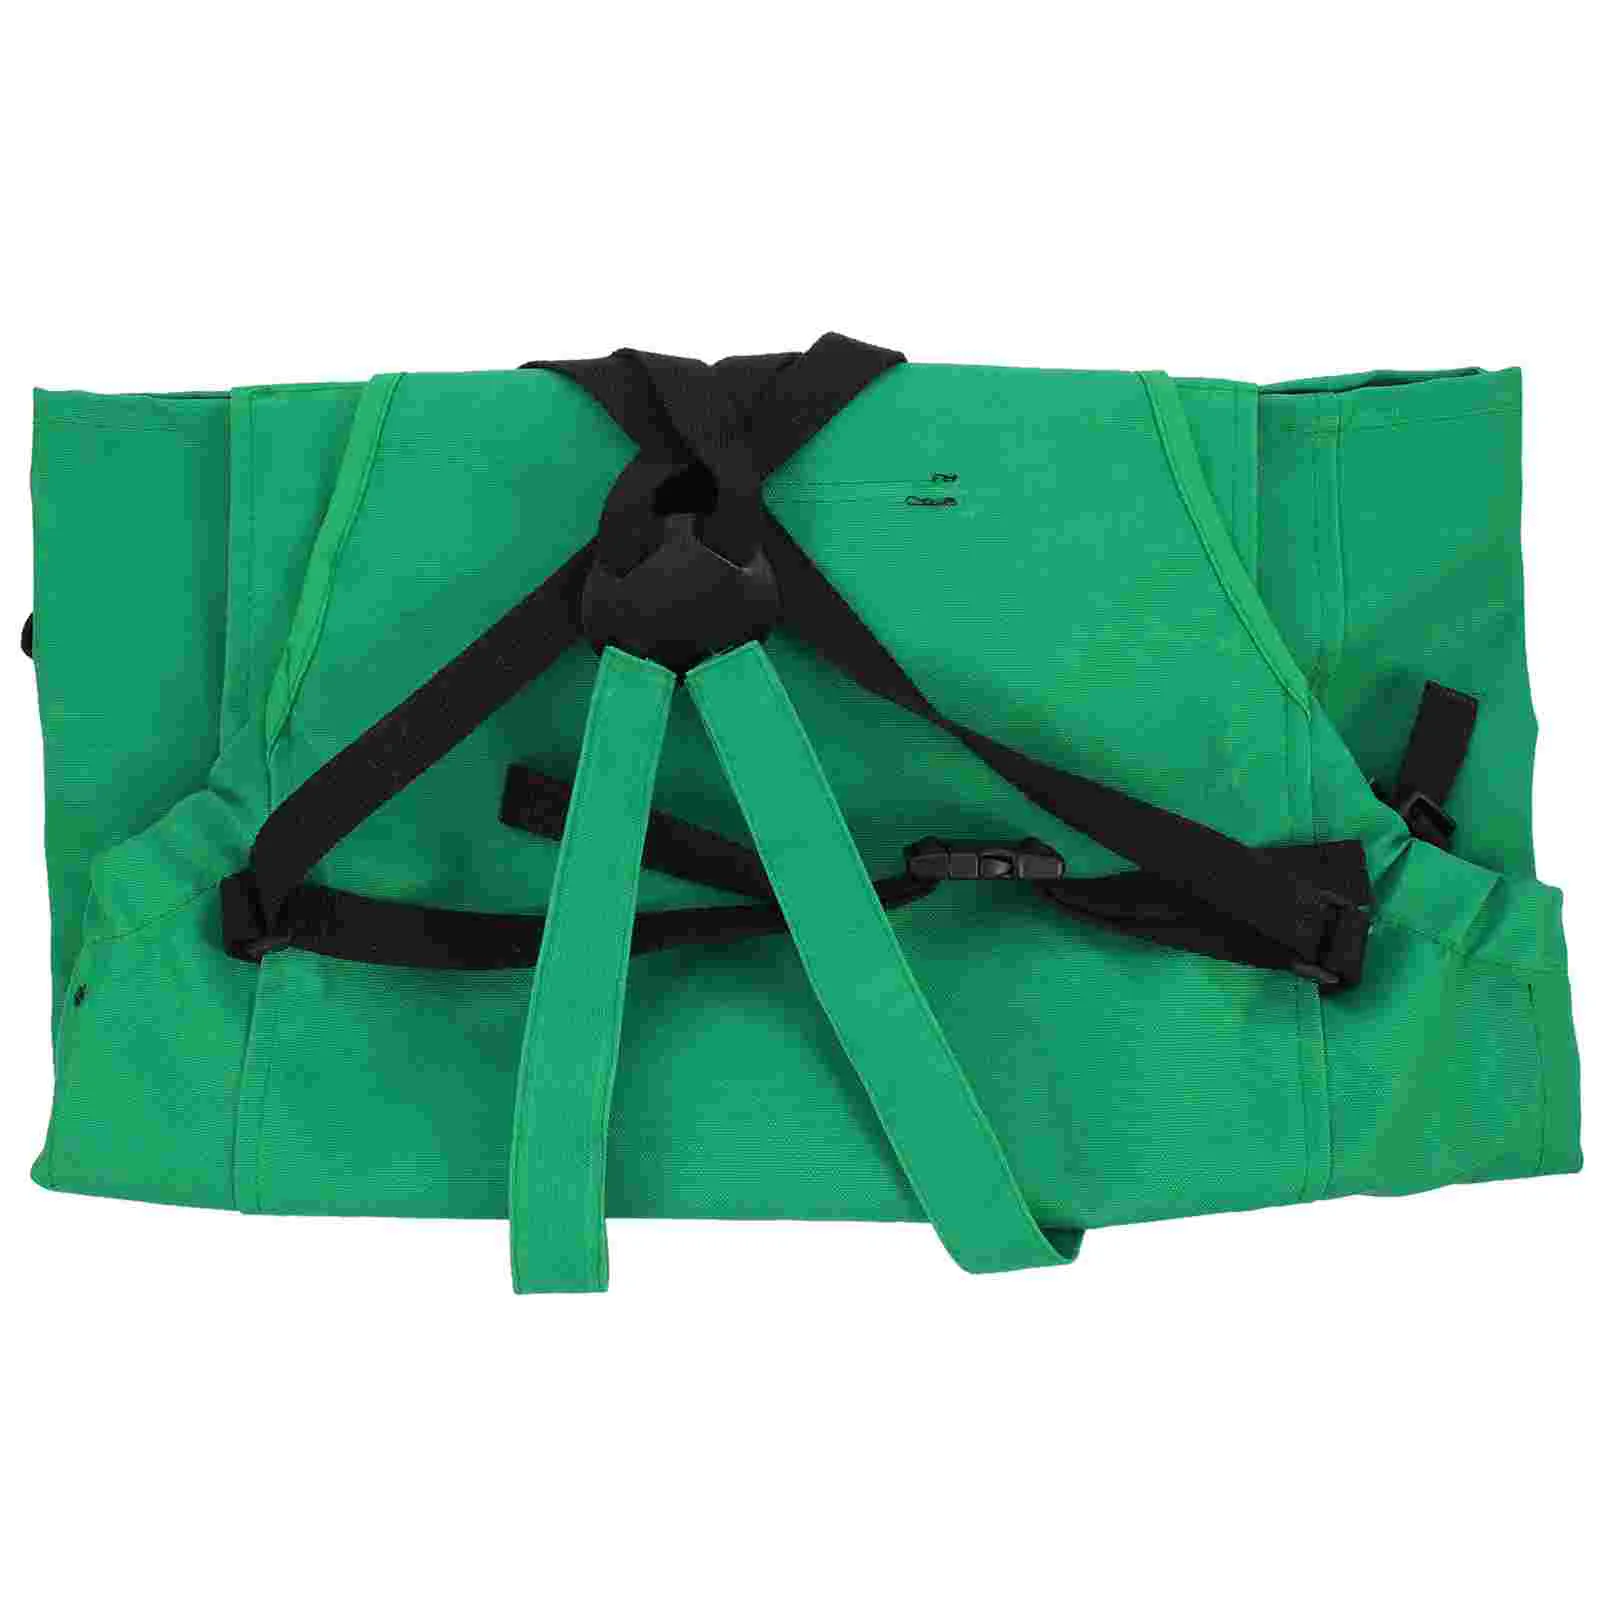 

Apron Picking Garden Gardening Vegetable Fruit Harvest Aprons Berry Fruits Supplies Storage Pockets Mushroom Tool Pouch Gift